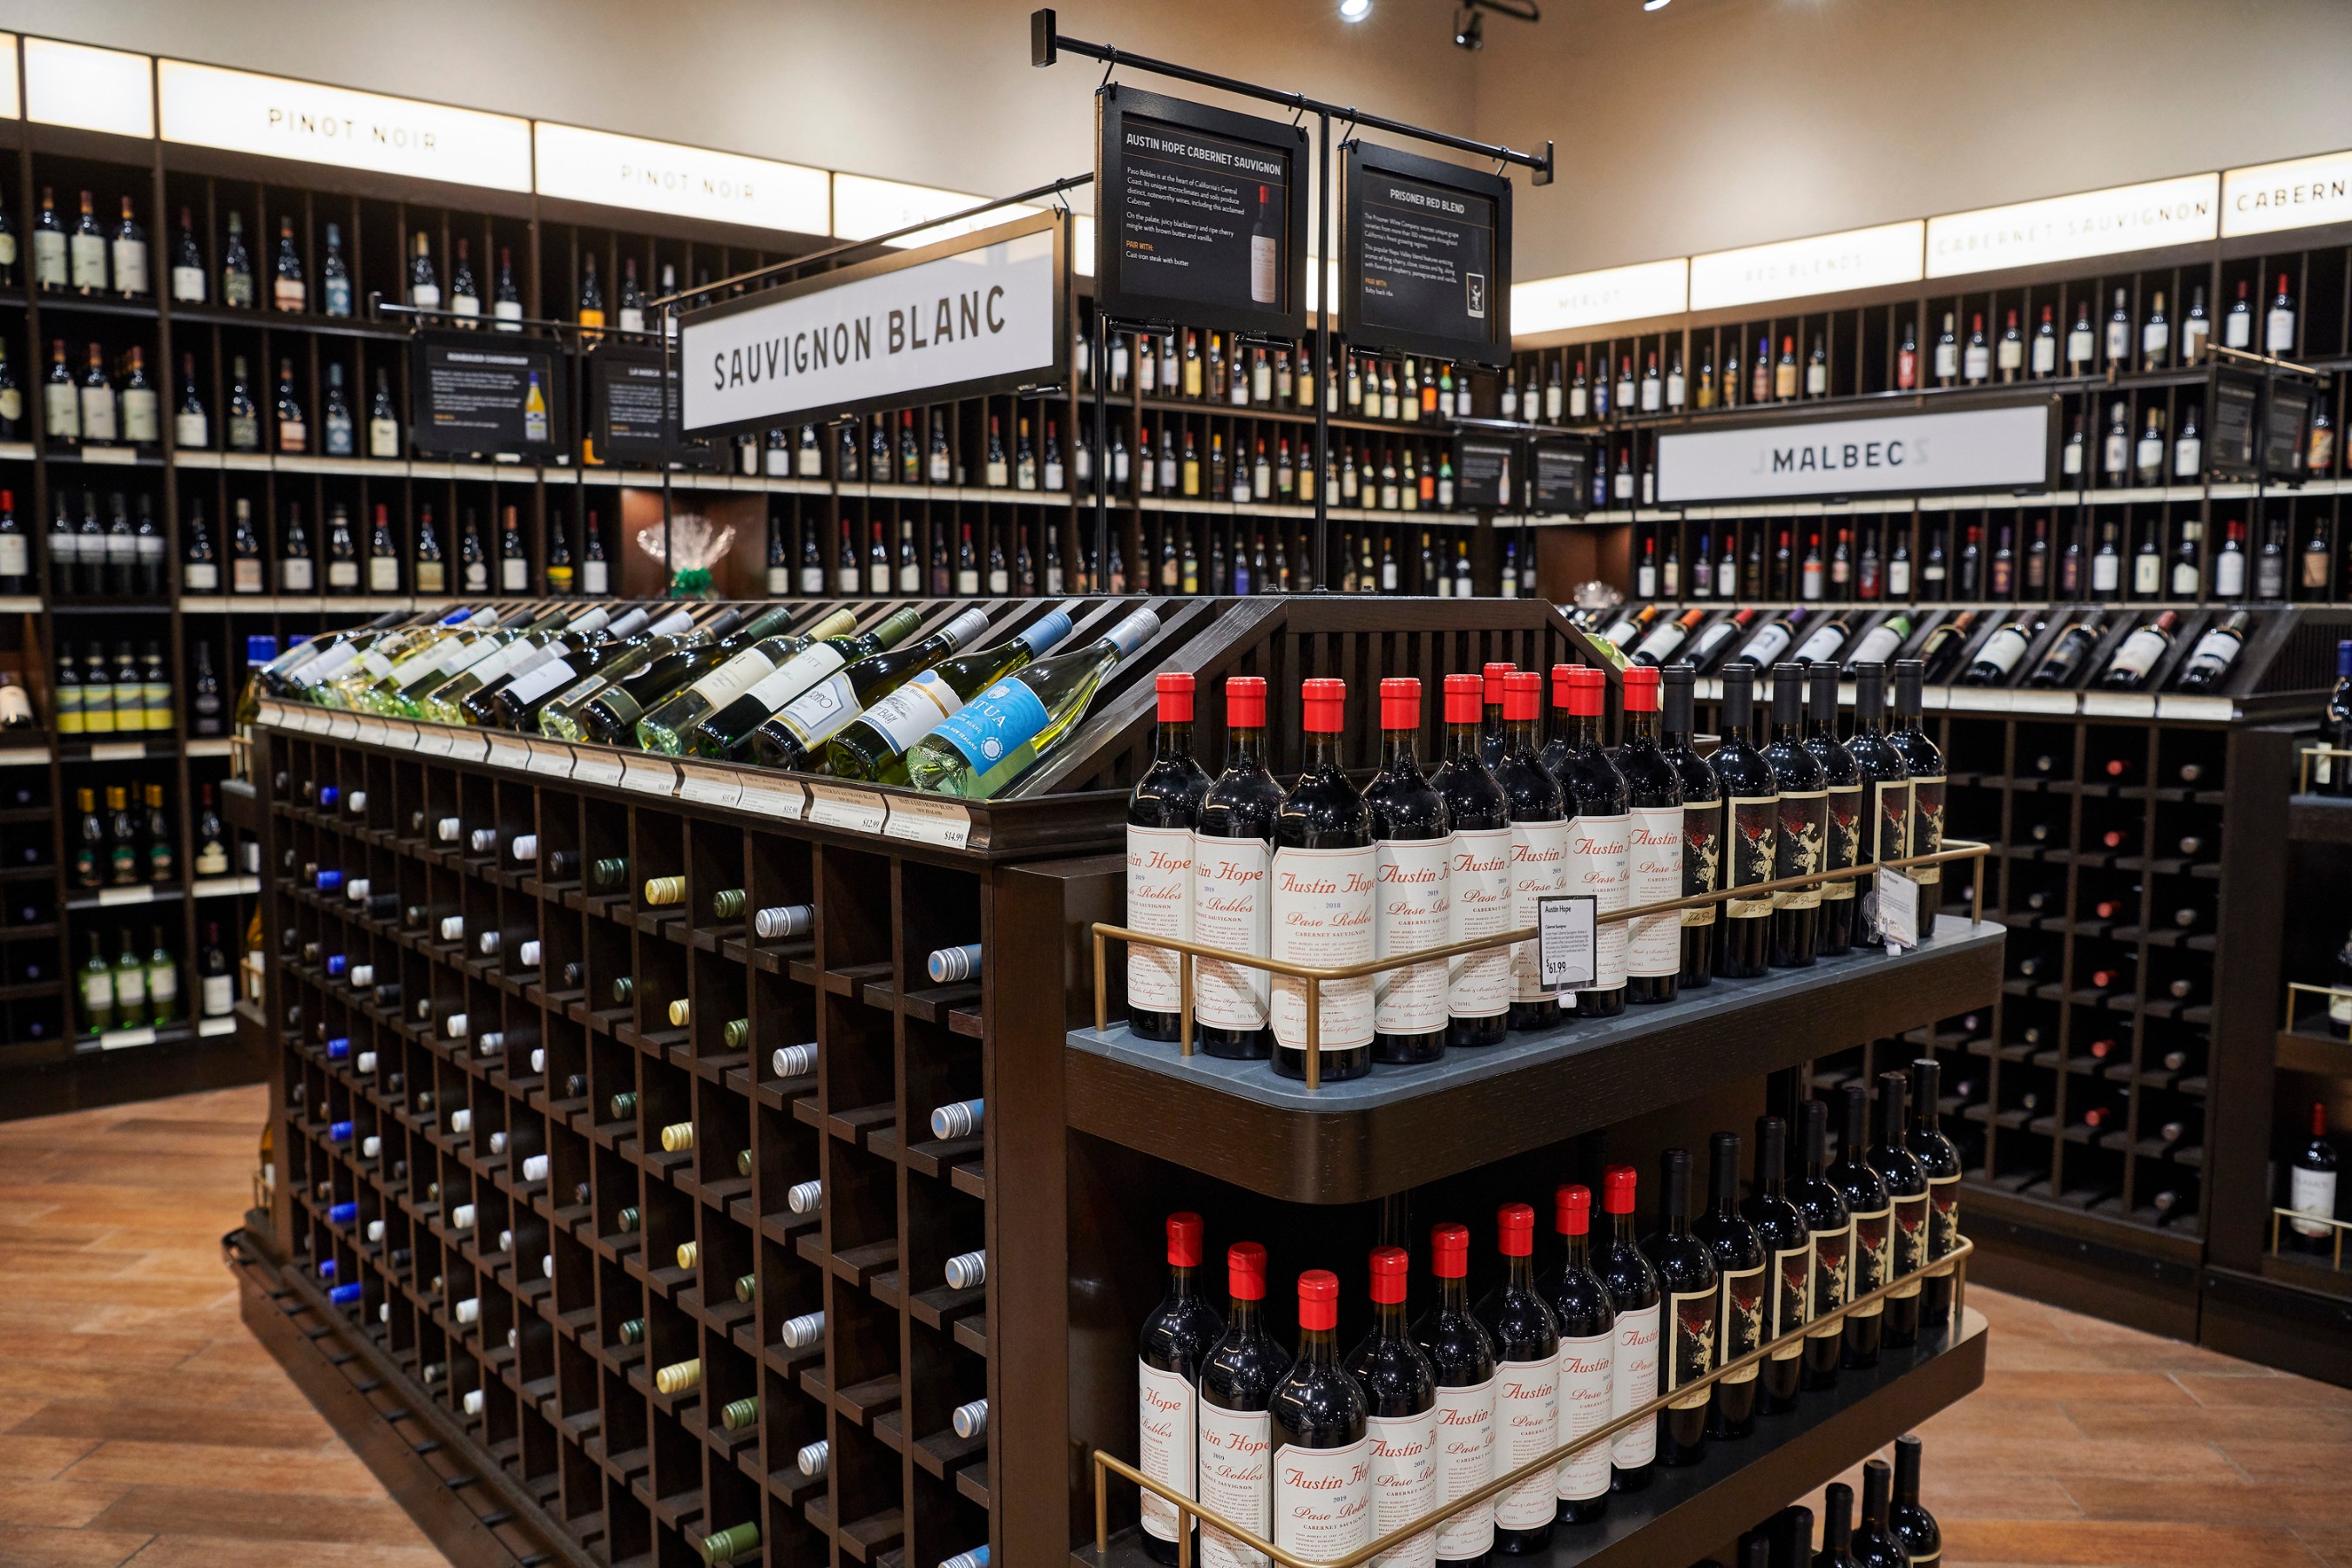 The art of EATertaining just got more exciting with the expanded wine selection at The Fresh Market, 3712 Lawndale in Greensboro, NC.